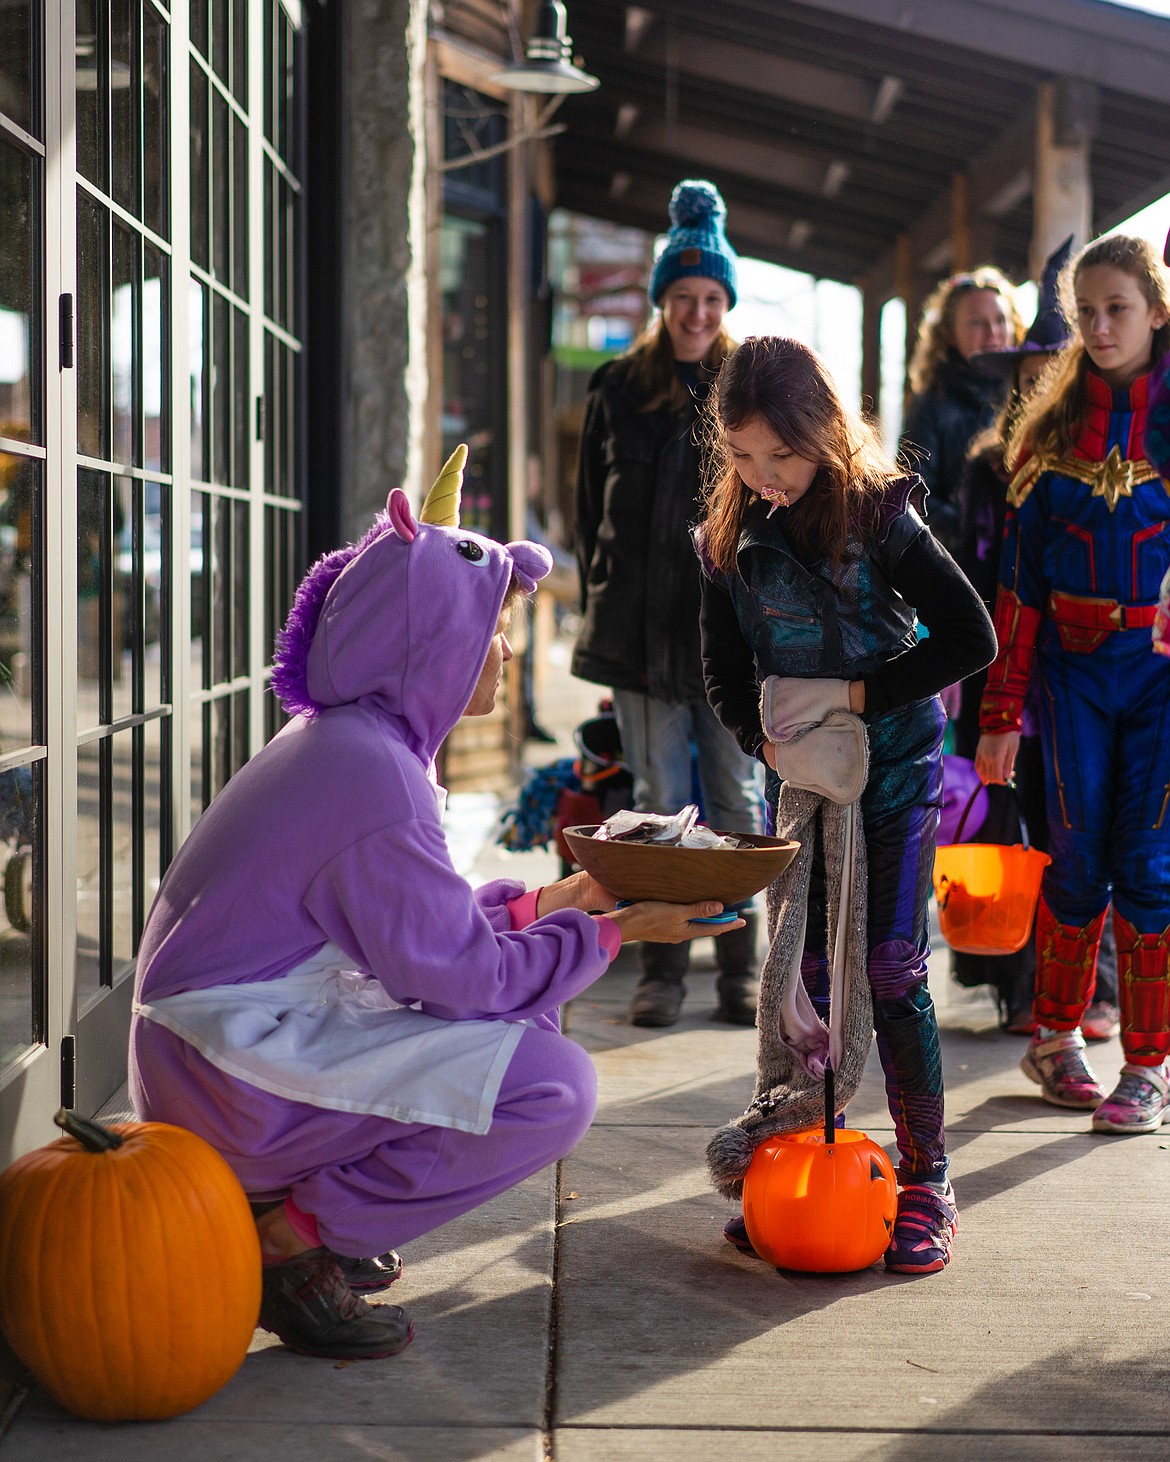 A unicorn hands out candy near Fleur Bake Shop during the Whitefish Trick or Treat downtown on Thursday. (Daniel McKay/Whitefish Pilot)